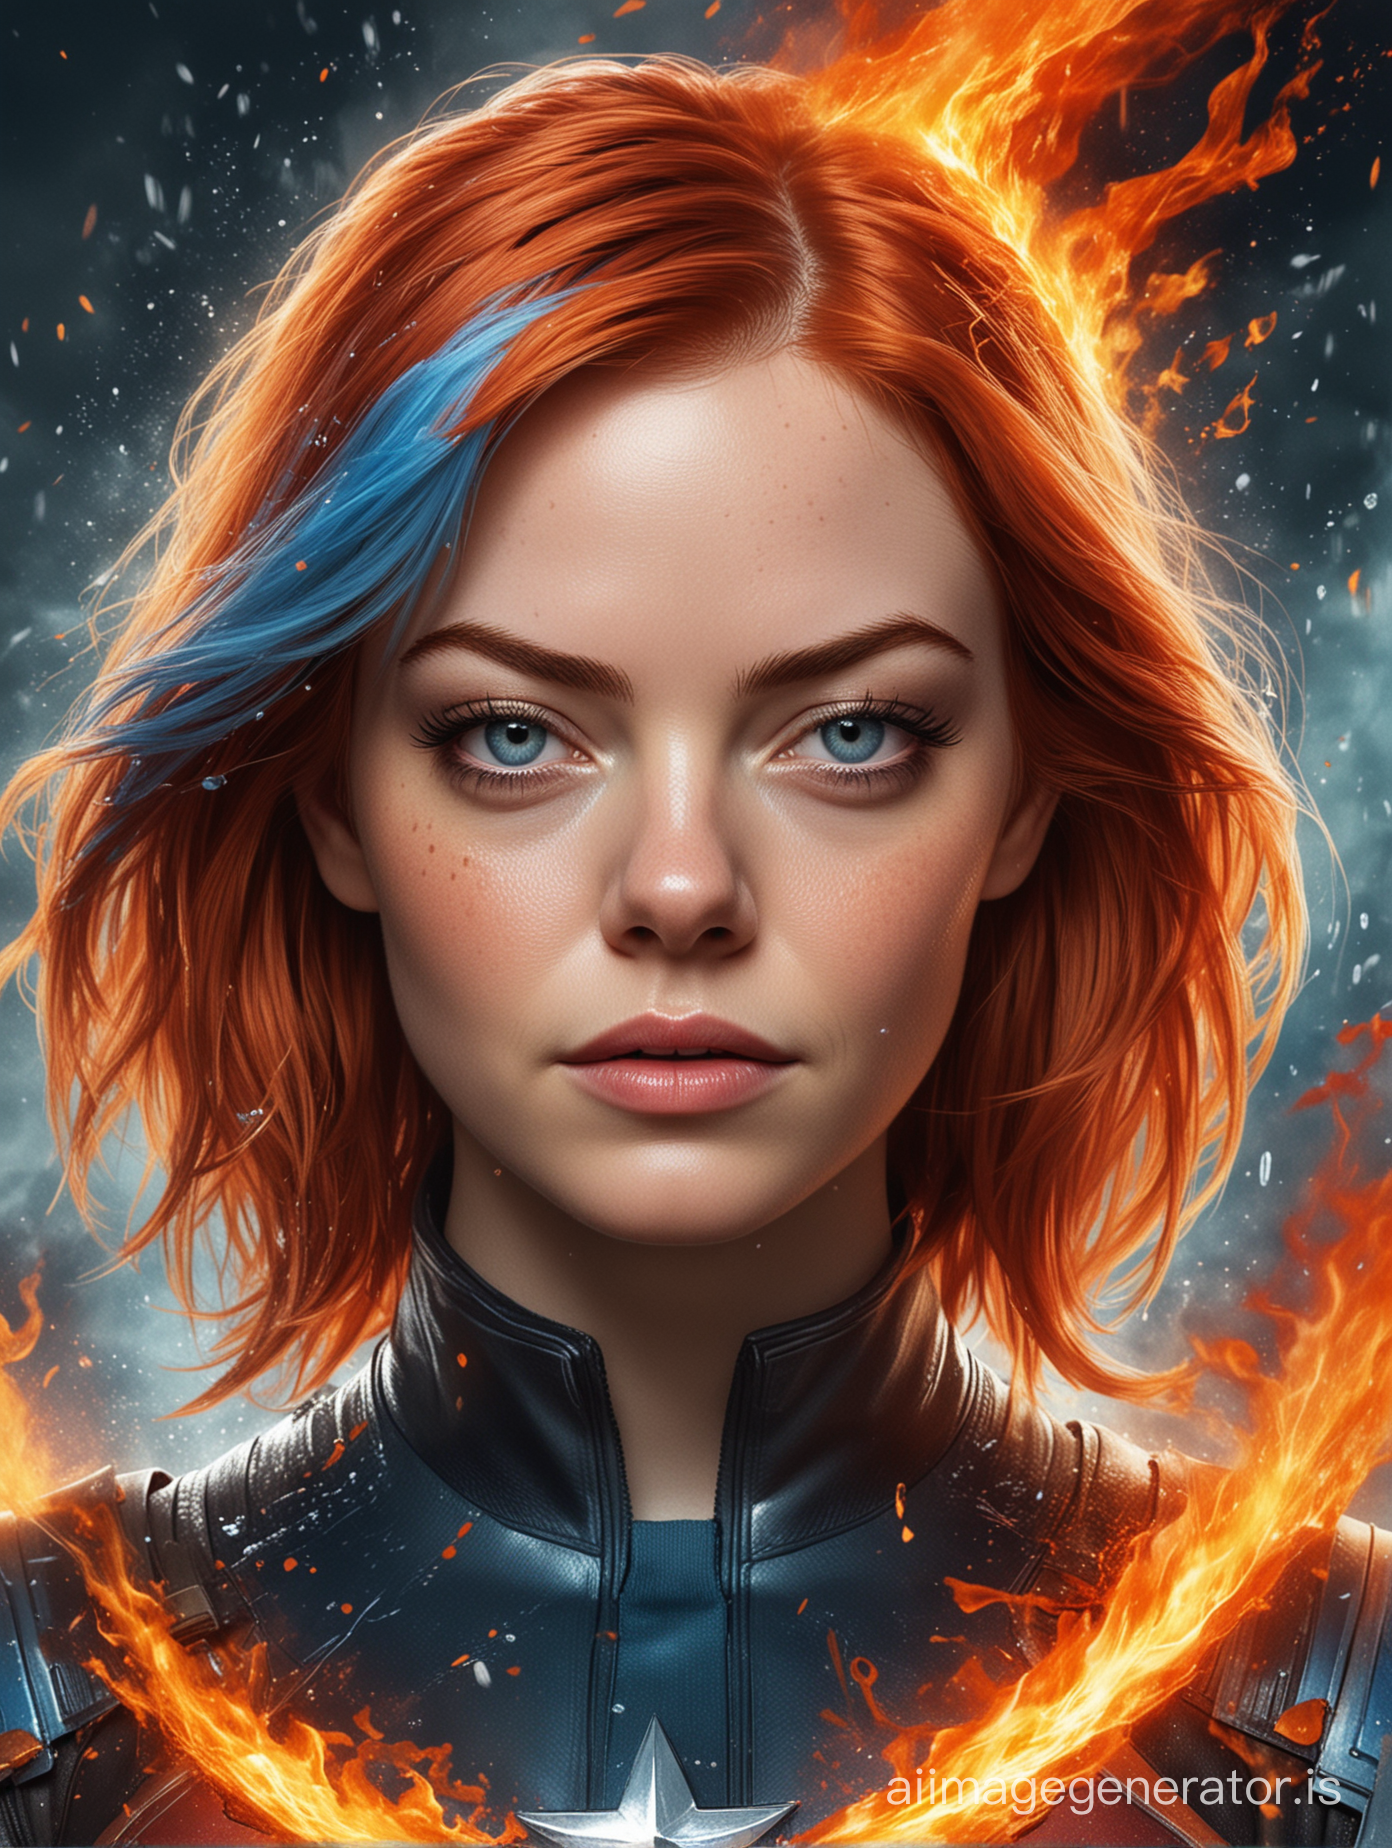 create an A4 movie poster of emma stone in fire and water female superhero suit. with her hair in half dye style - with half red hair on left side of her head, and white/light blue hair on right side of her head, in A4 portrait, with some fire and water elements, and some headspace on the top of image to see her full head, like a half fire and half water illustration. make her left eye pupil red and right eye pupil blue. background is half wildfire and half flood. put the title 'Aquaflame' with water and fire element typography. create it with reference from captain marvel poster